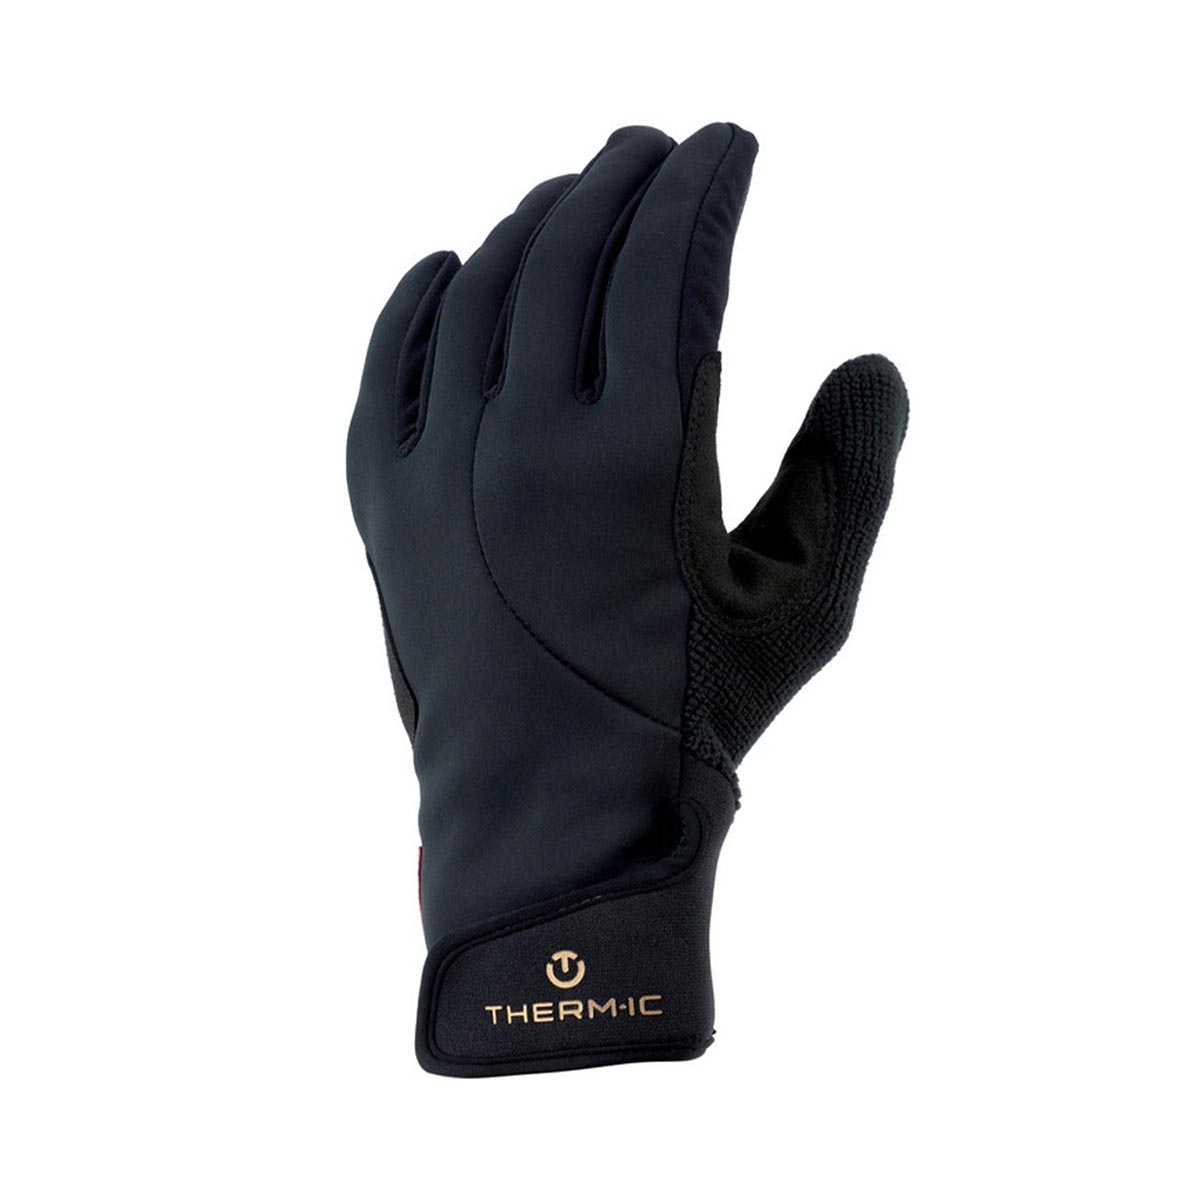 THERM-IC - NORDIC EXPLORATION GLOVES